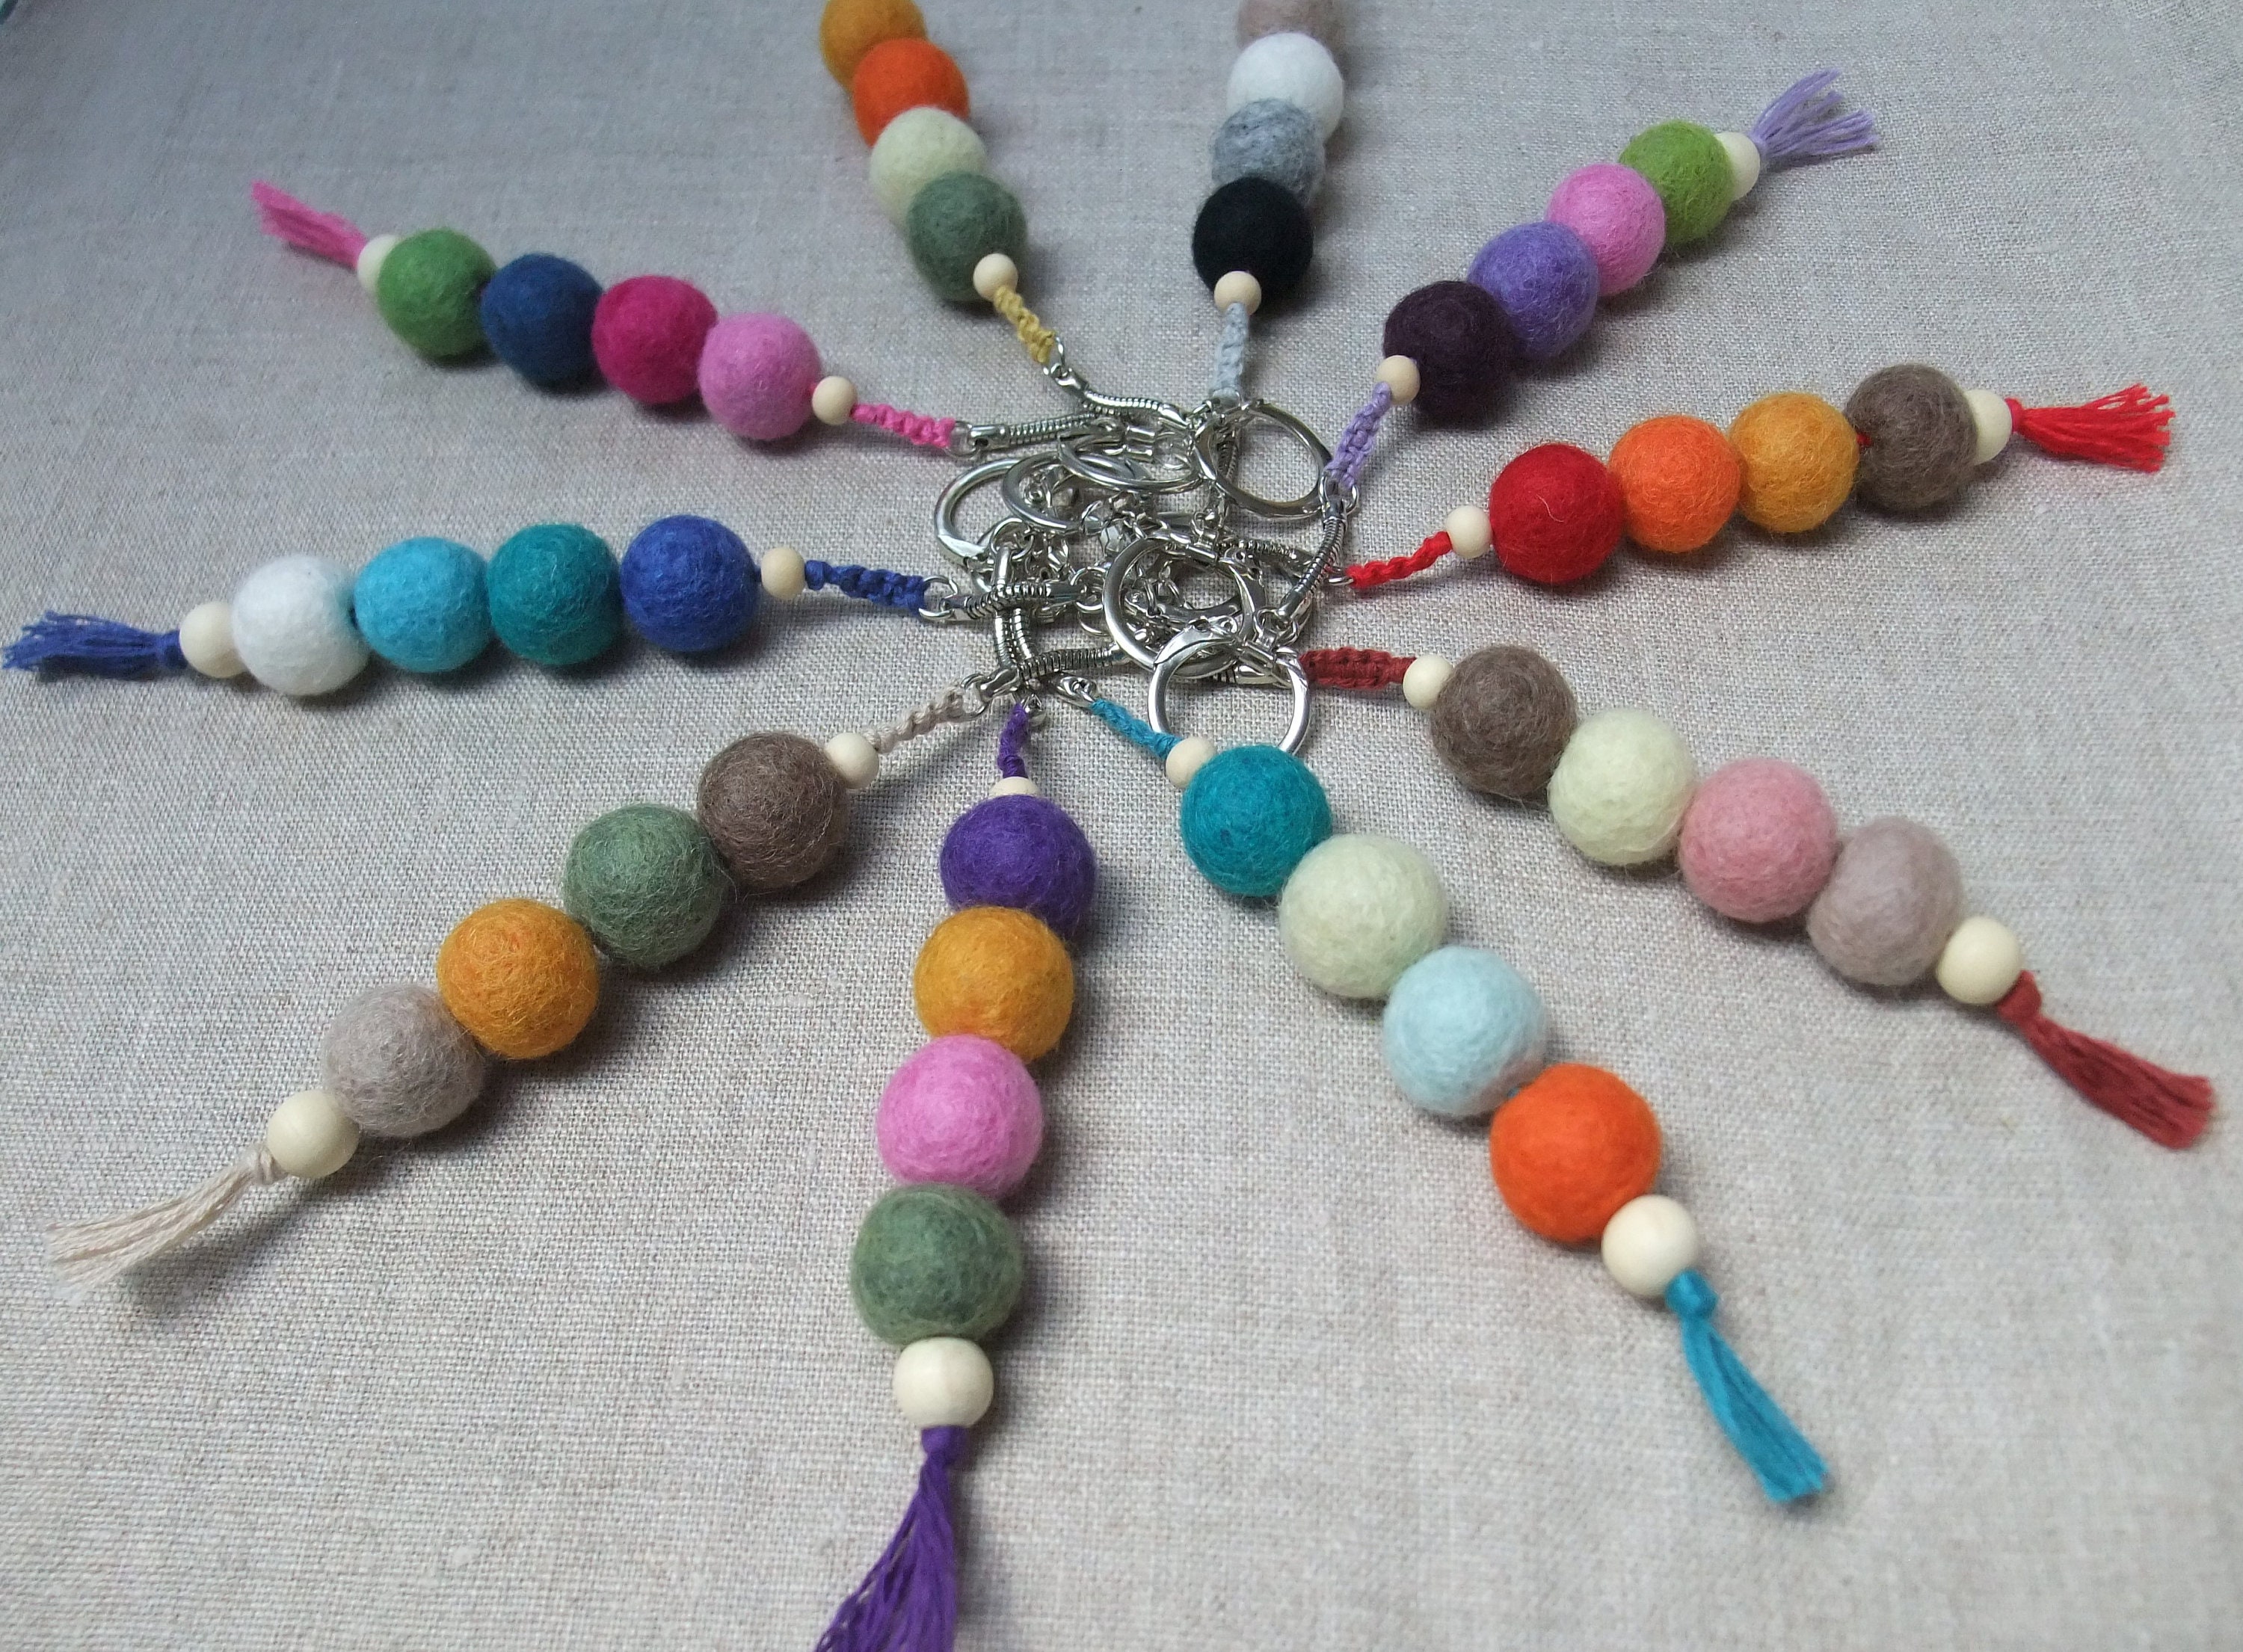 Felt Ball and Wood Bead Keychain Craft Kit With White Wool Felted